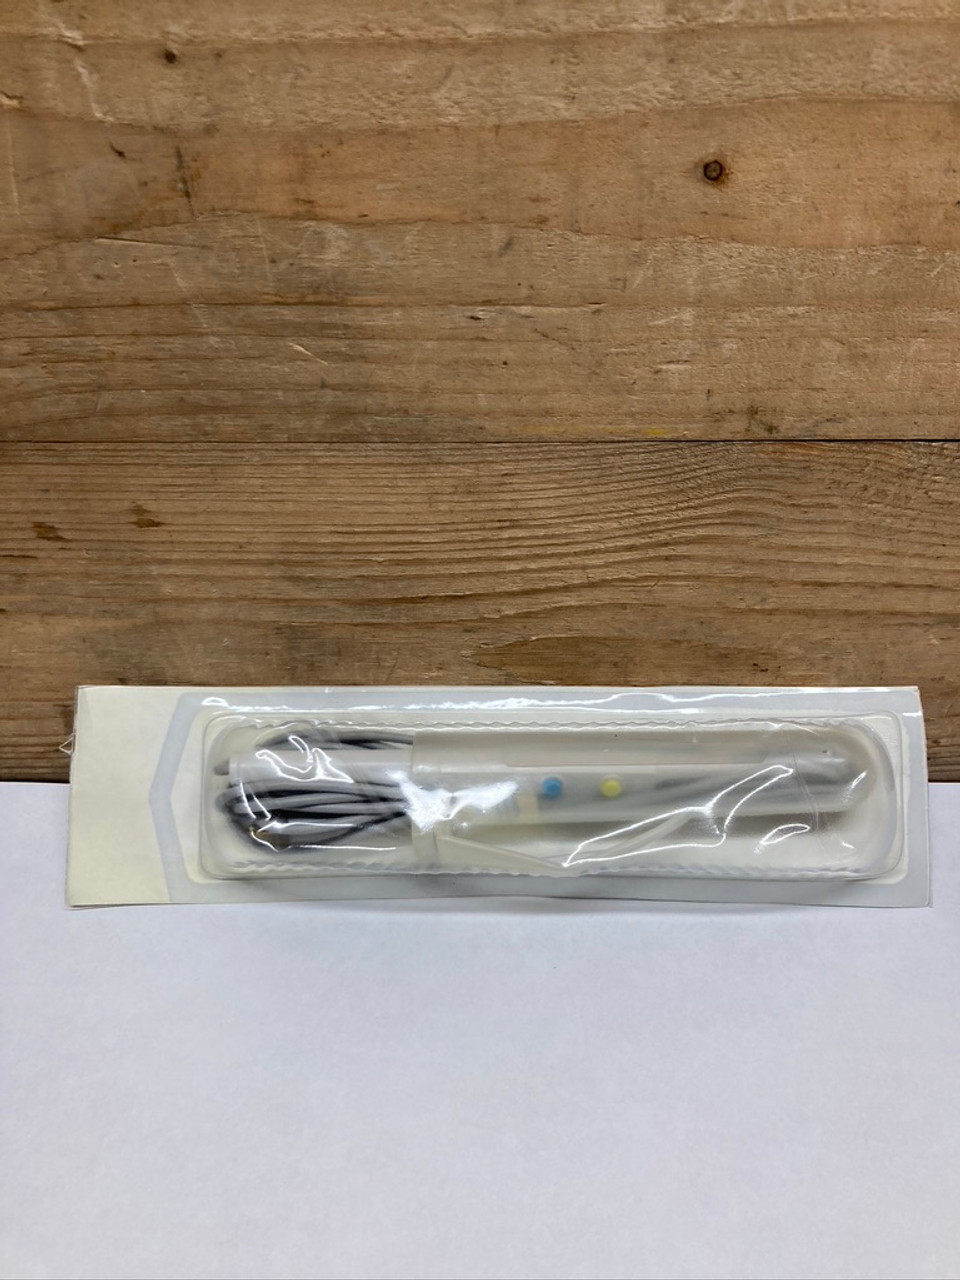 Case of 10 Tech-Switch Pencil Type Electrosurgery Electrode Handle 9164 Concept